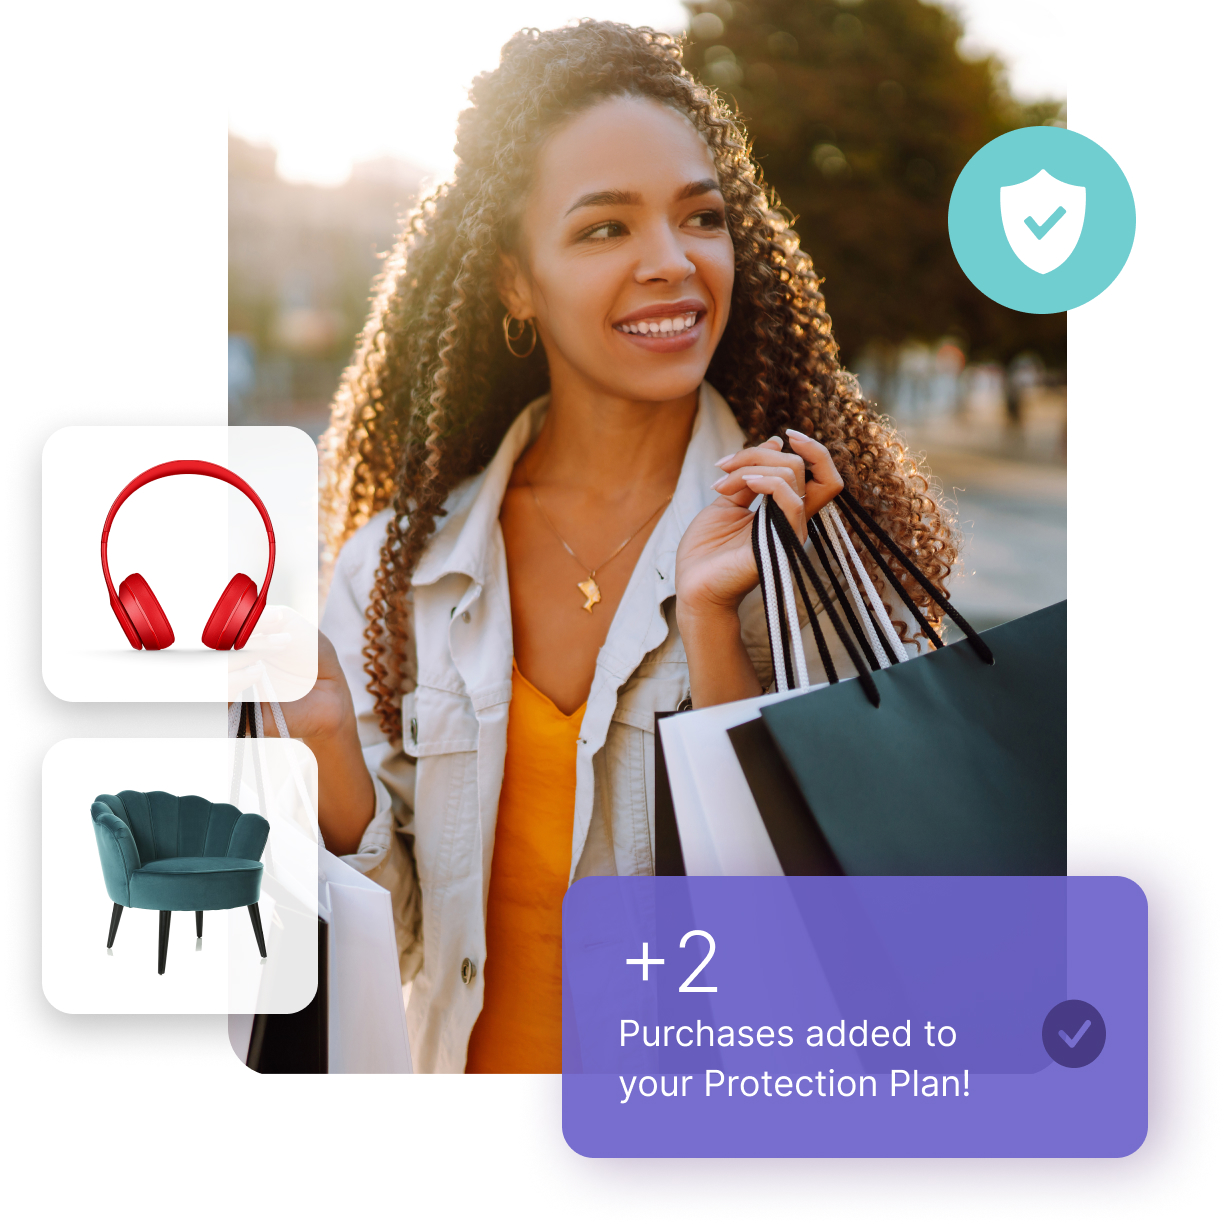 Protect unlimited purchases with zero fees